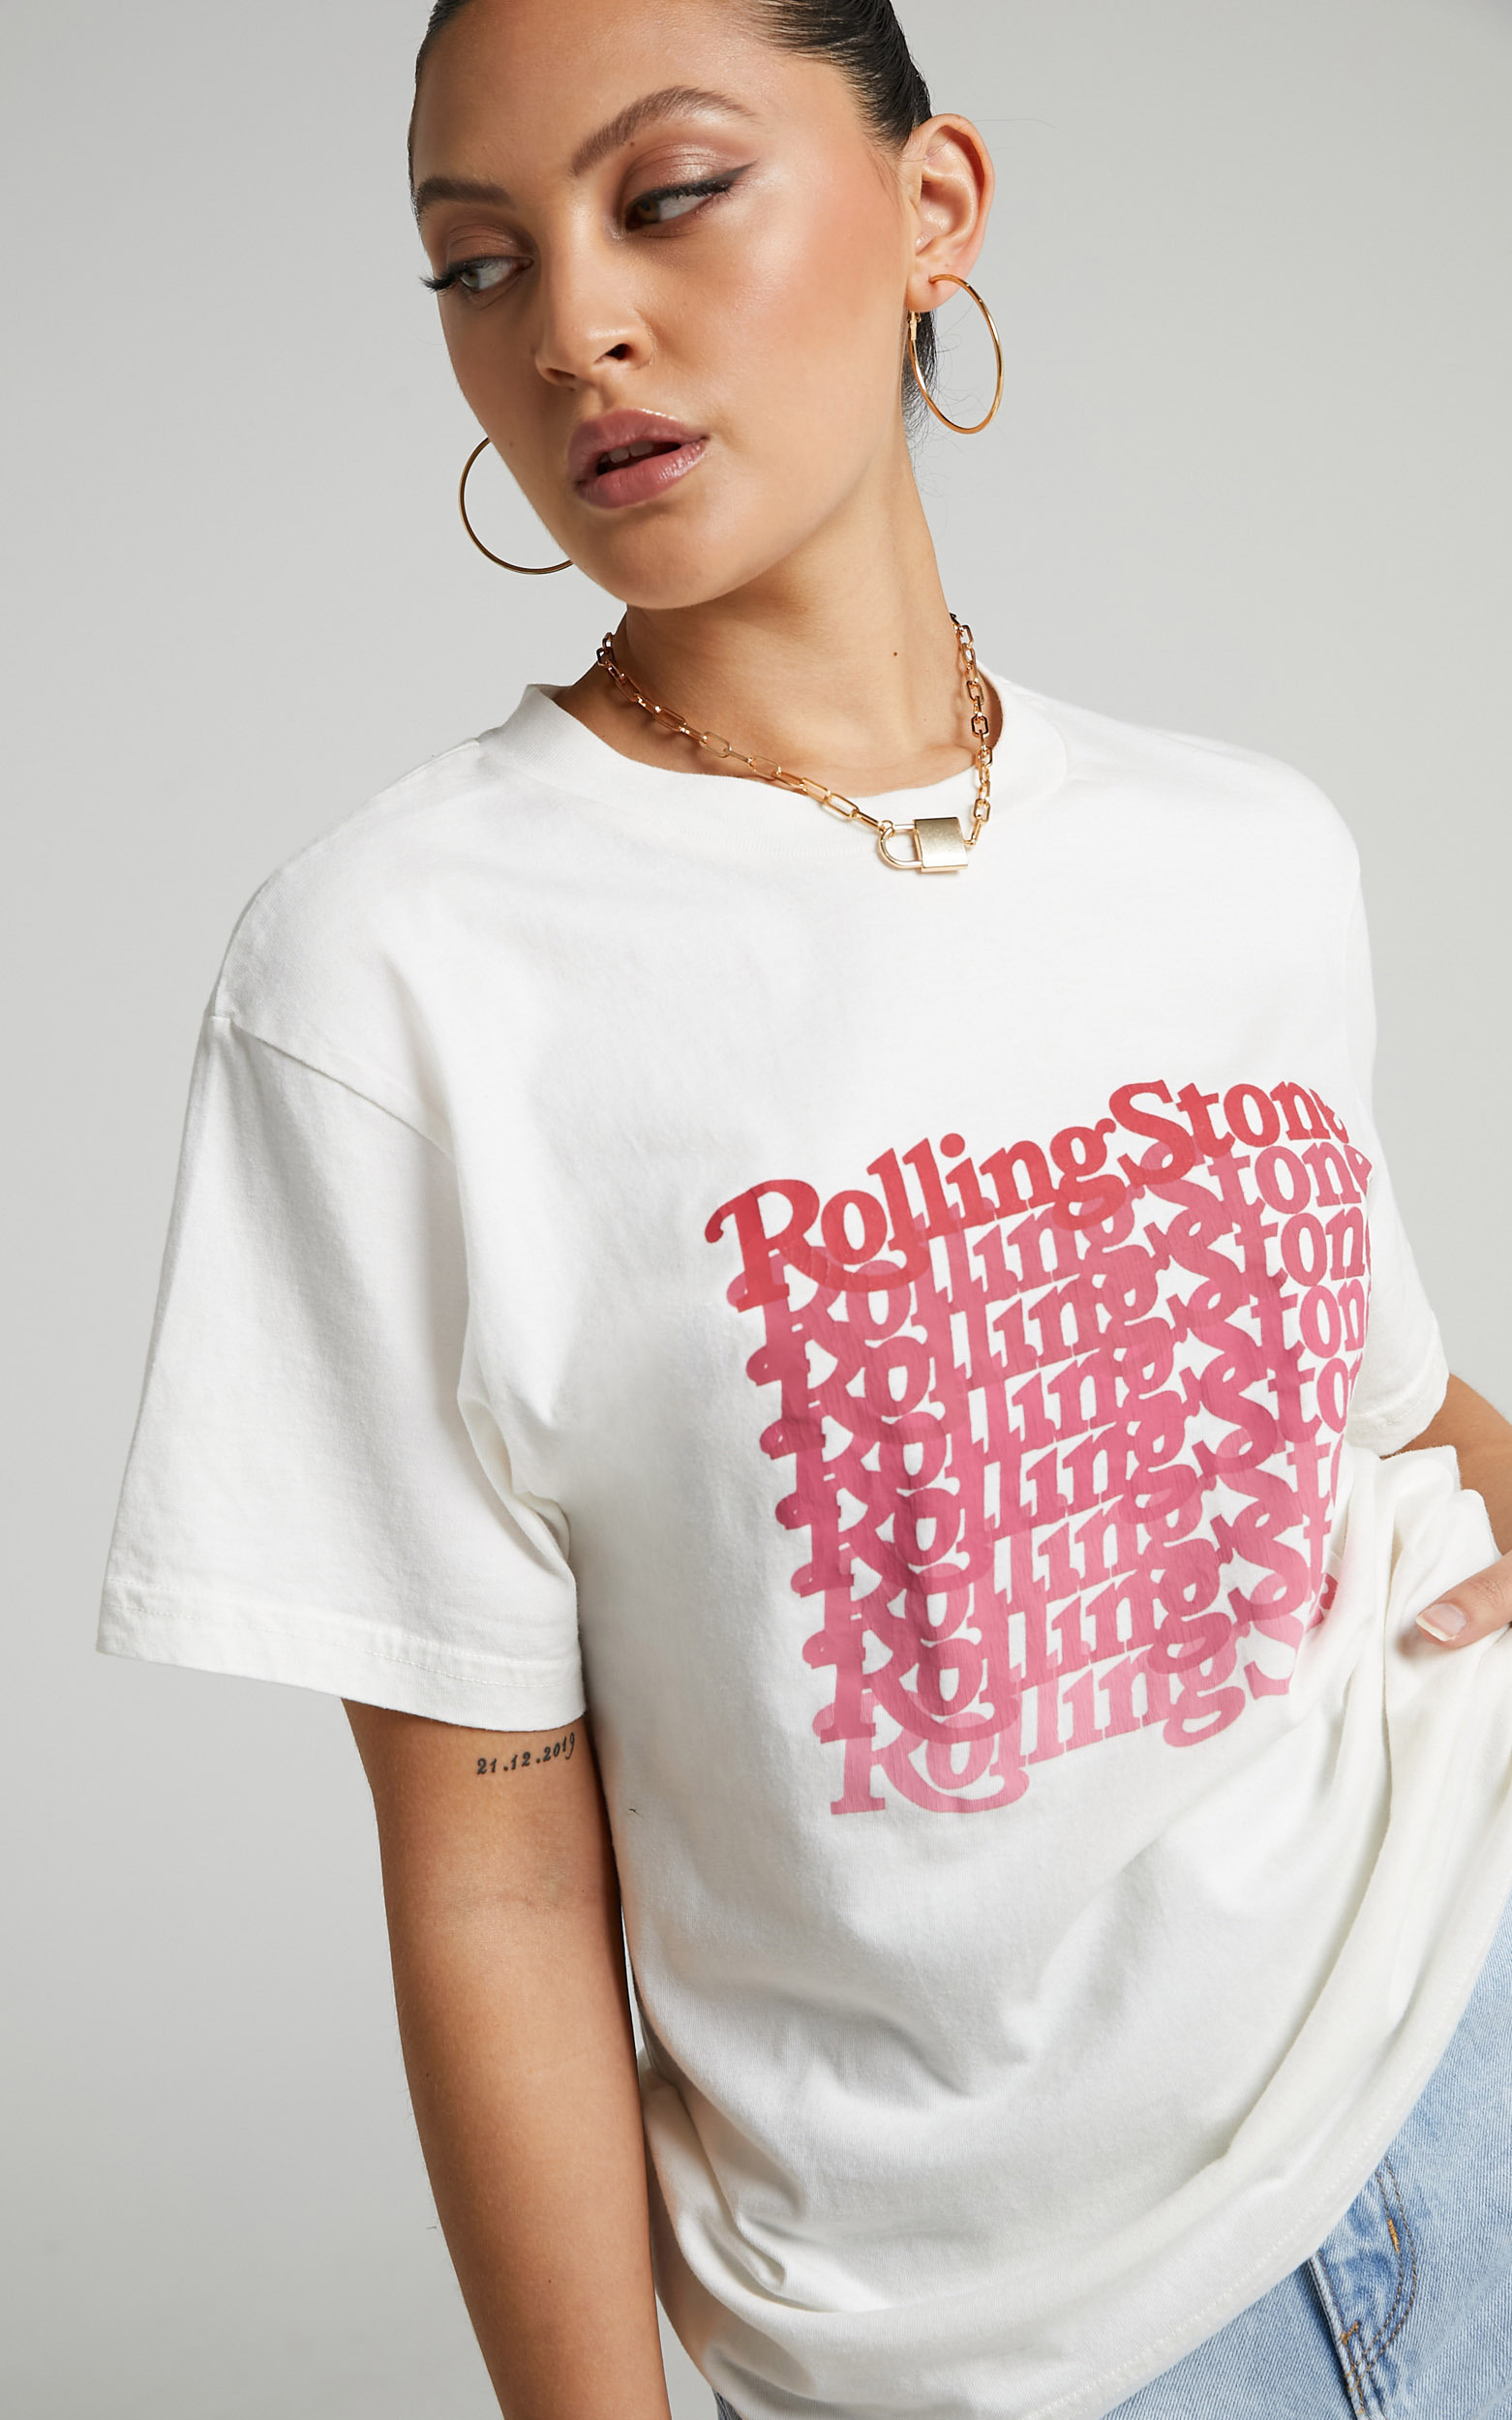 Rolla's - Rolling Stone 2020 Tomboy Tee in Vintage White - 06, WHT1, hi-res image number null